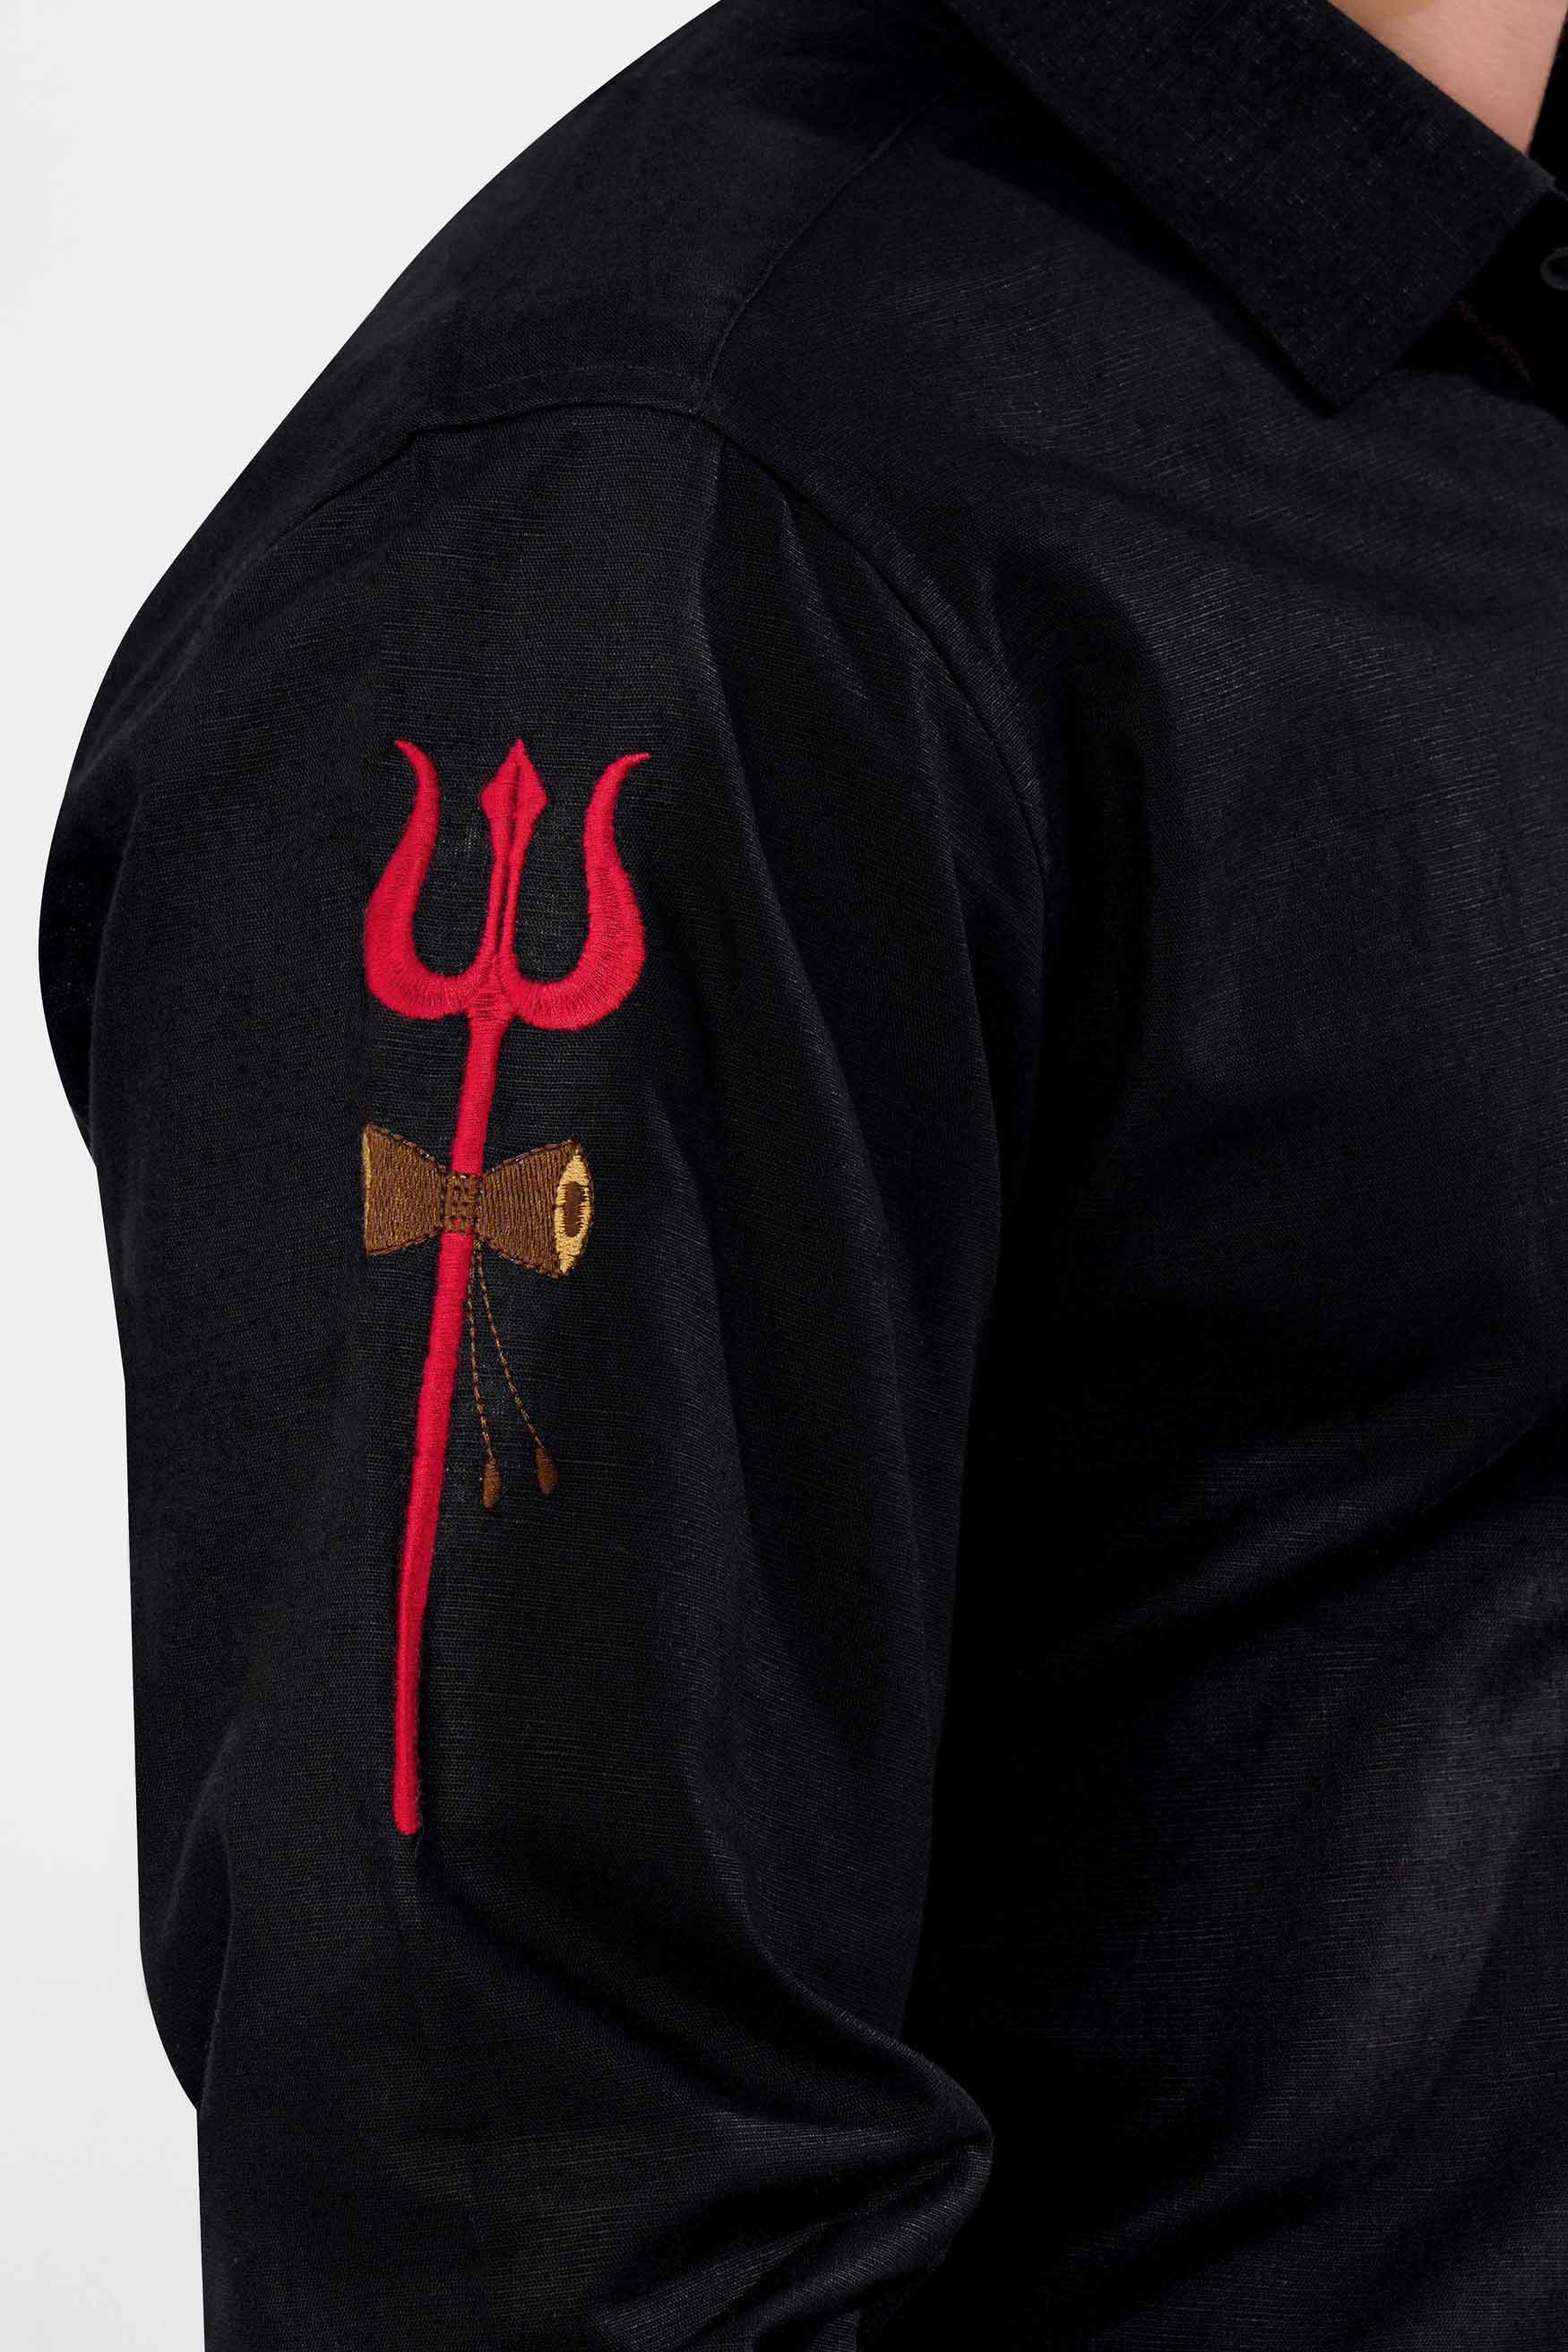 Jade Black with Lord Shiva Trident Embroidered Luxurious Linen Designer Shirt